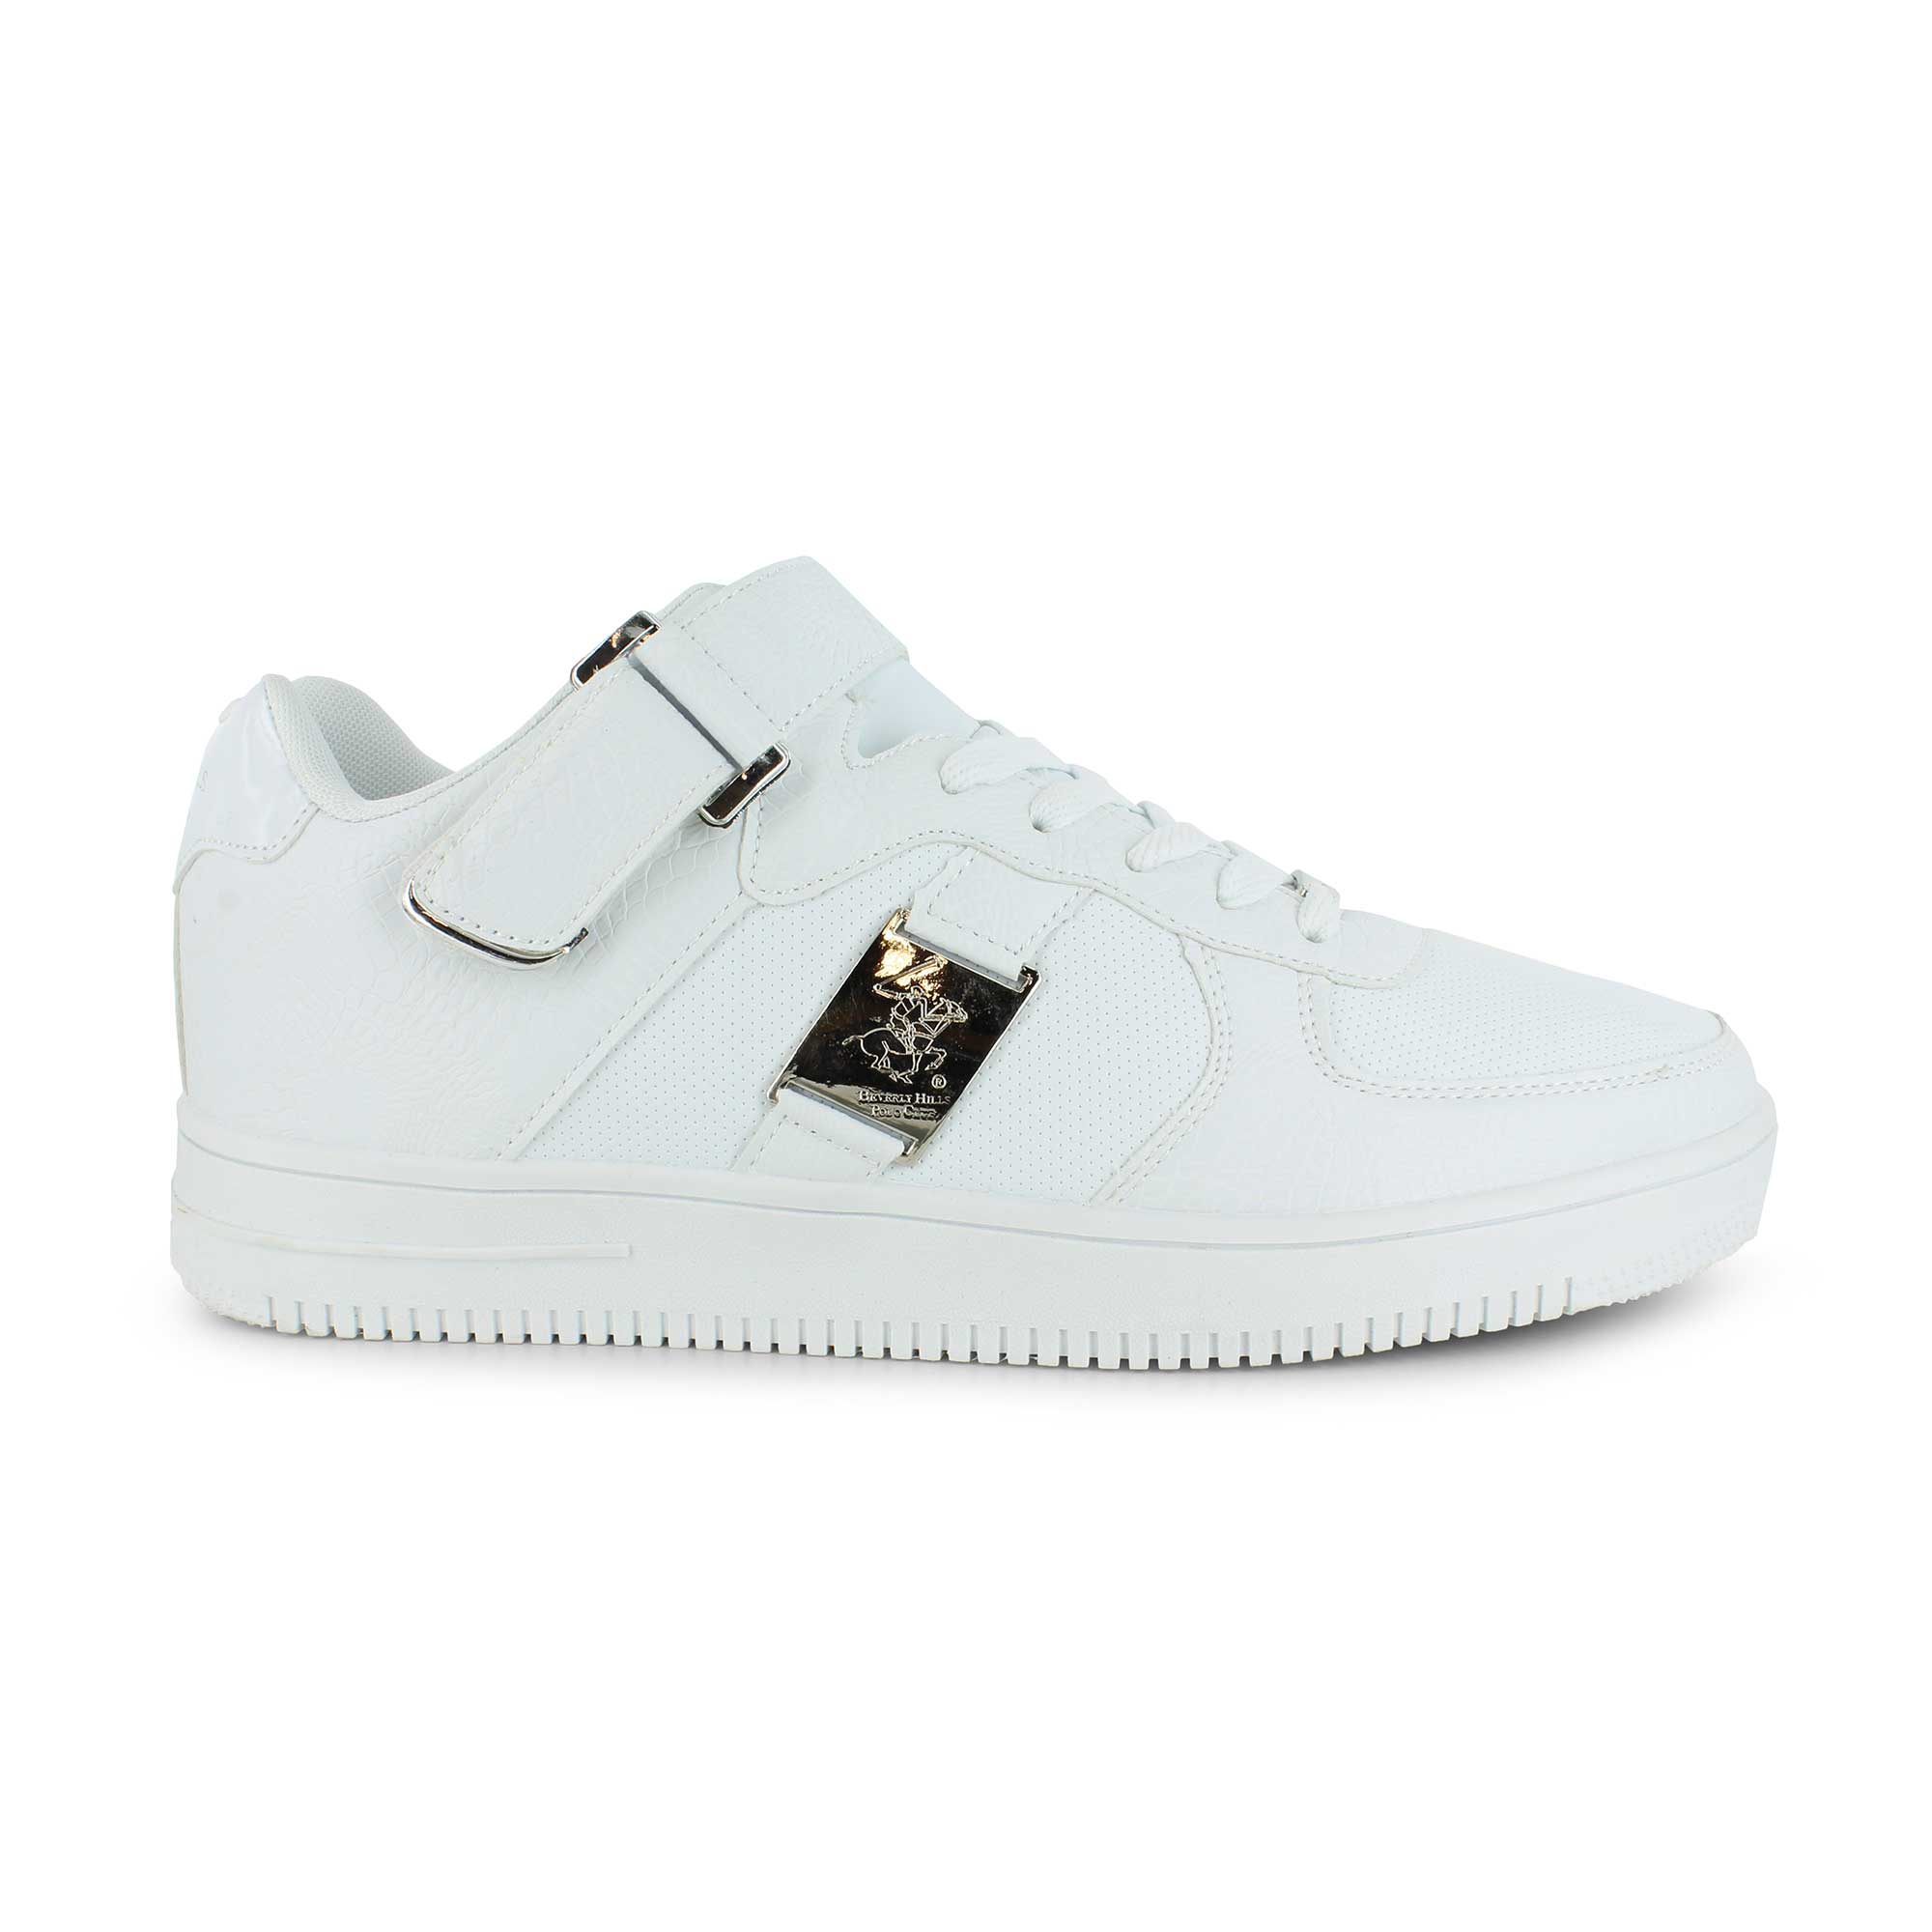 beverly hills polo club sneakers